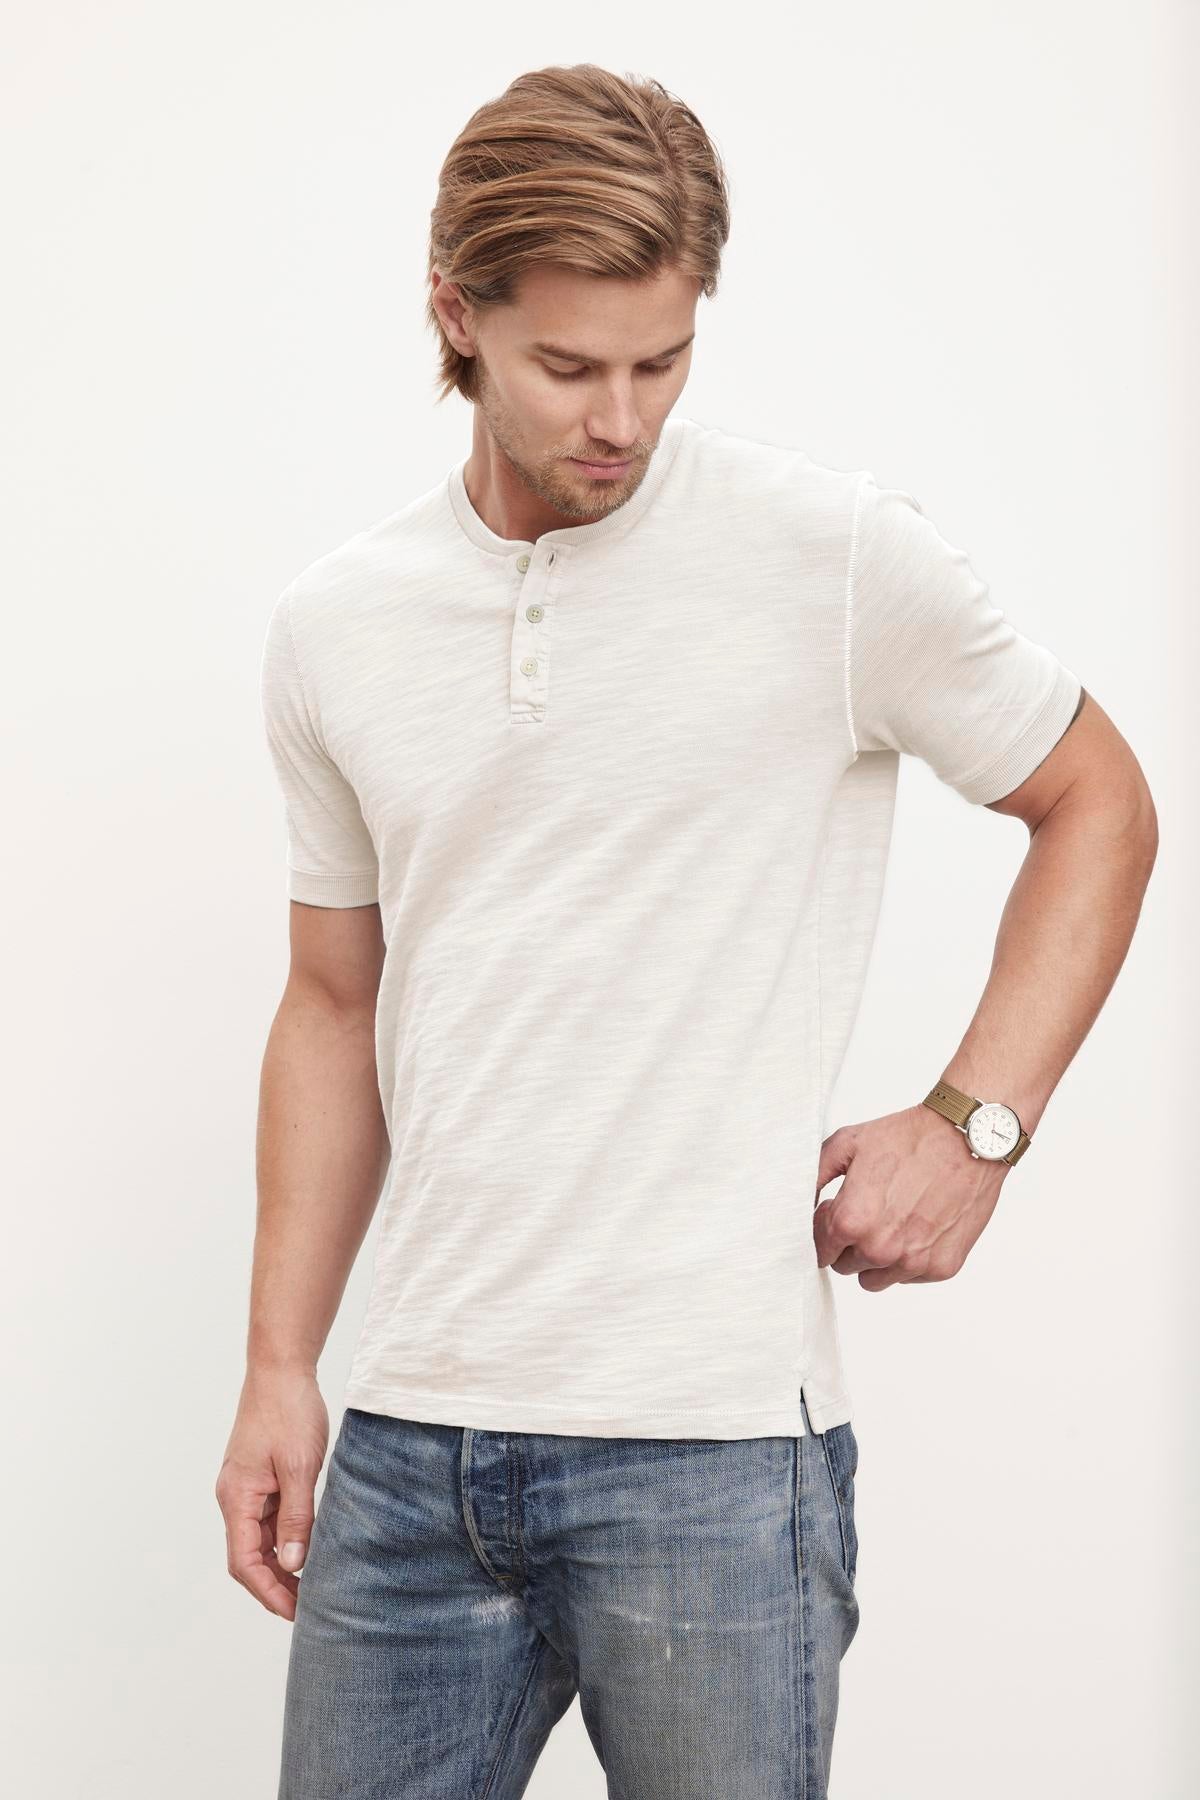   A man wearing jeans and a white Velvet by Graham & Spencer VITO HENLEY shirt. 